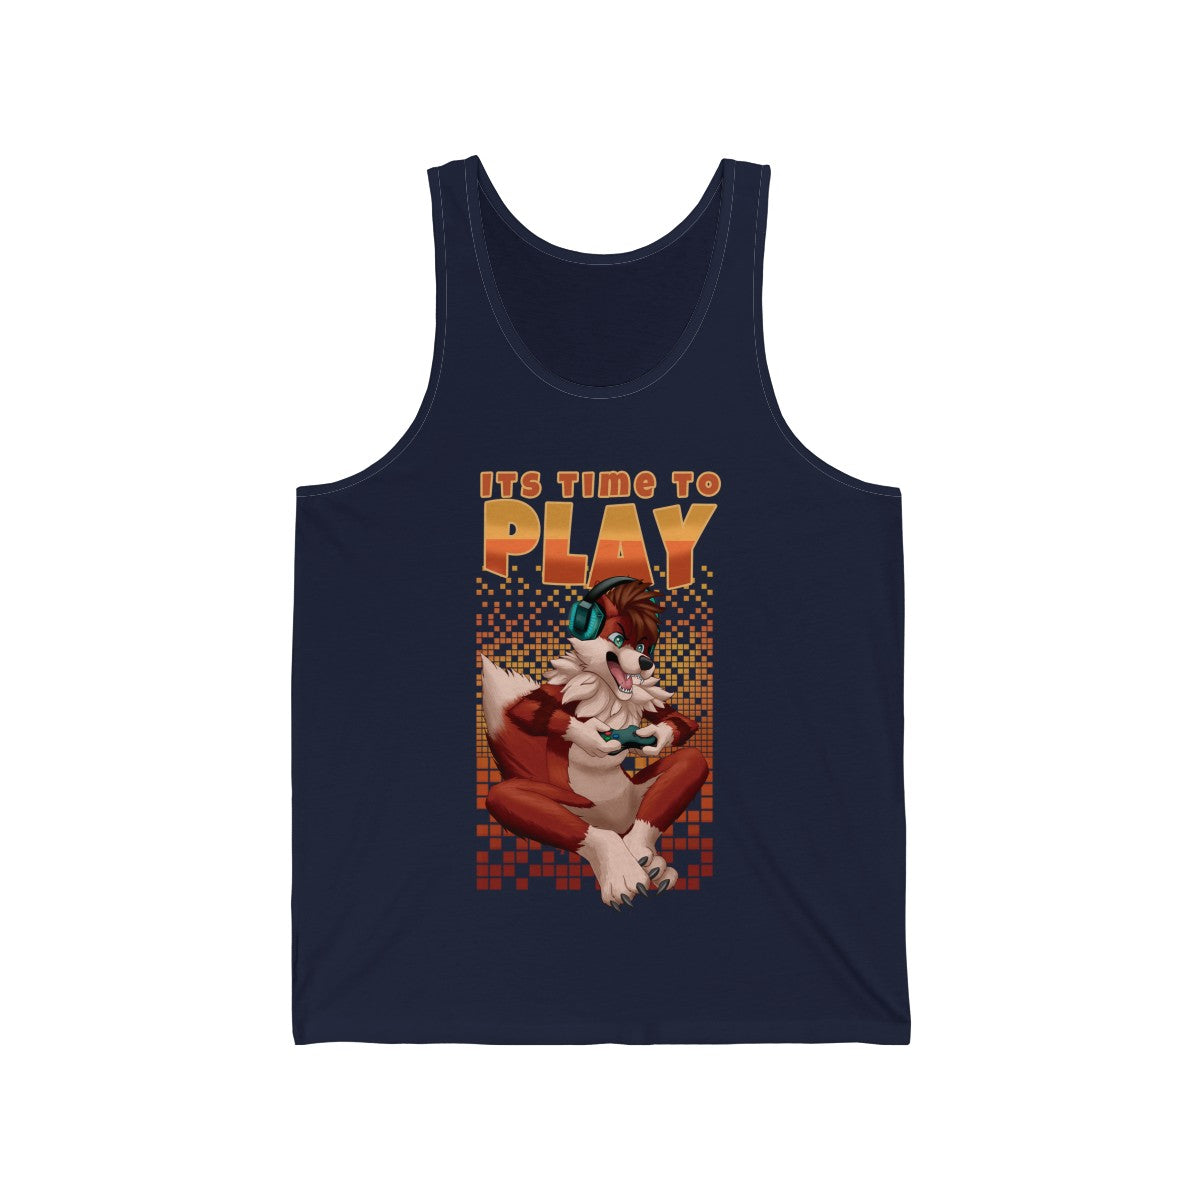 Its Time to Play - Tank Top Tank Top Artworktee Navy Blue XS 